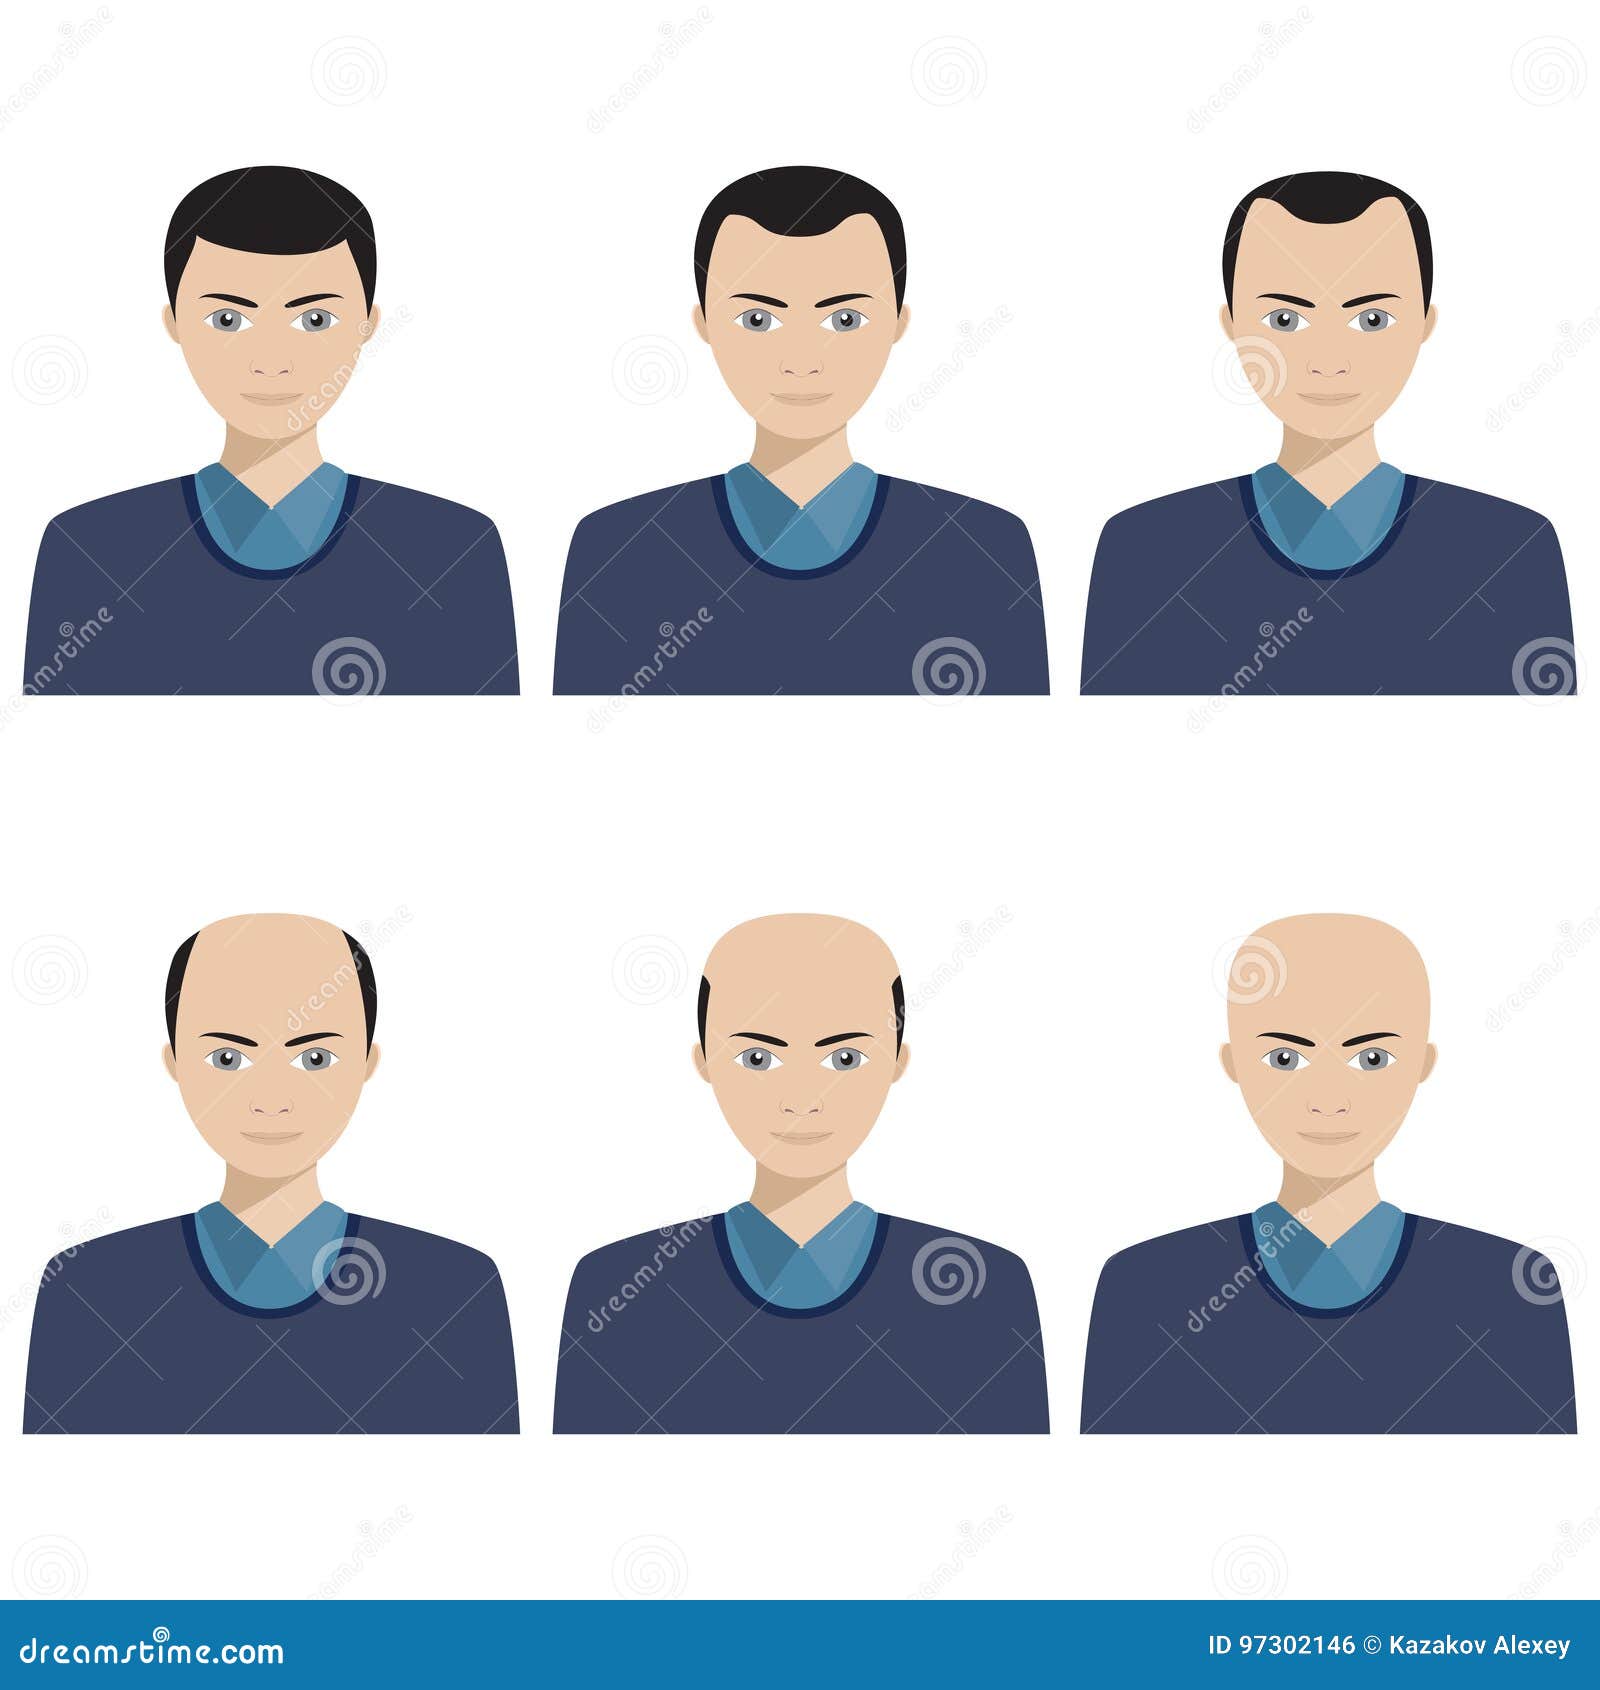 hair loss stages and types of baldness.